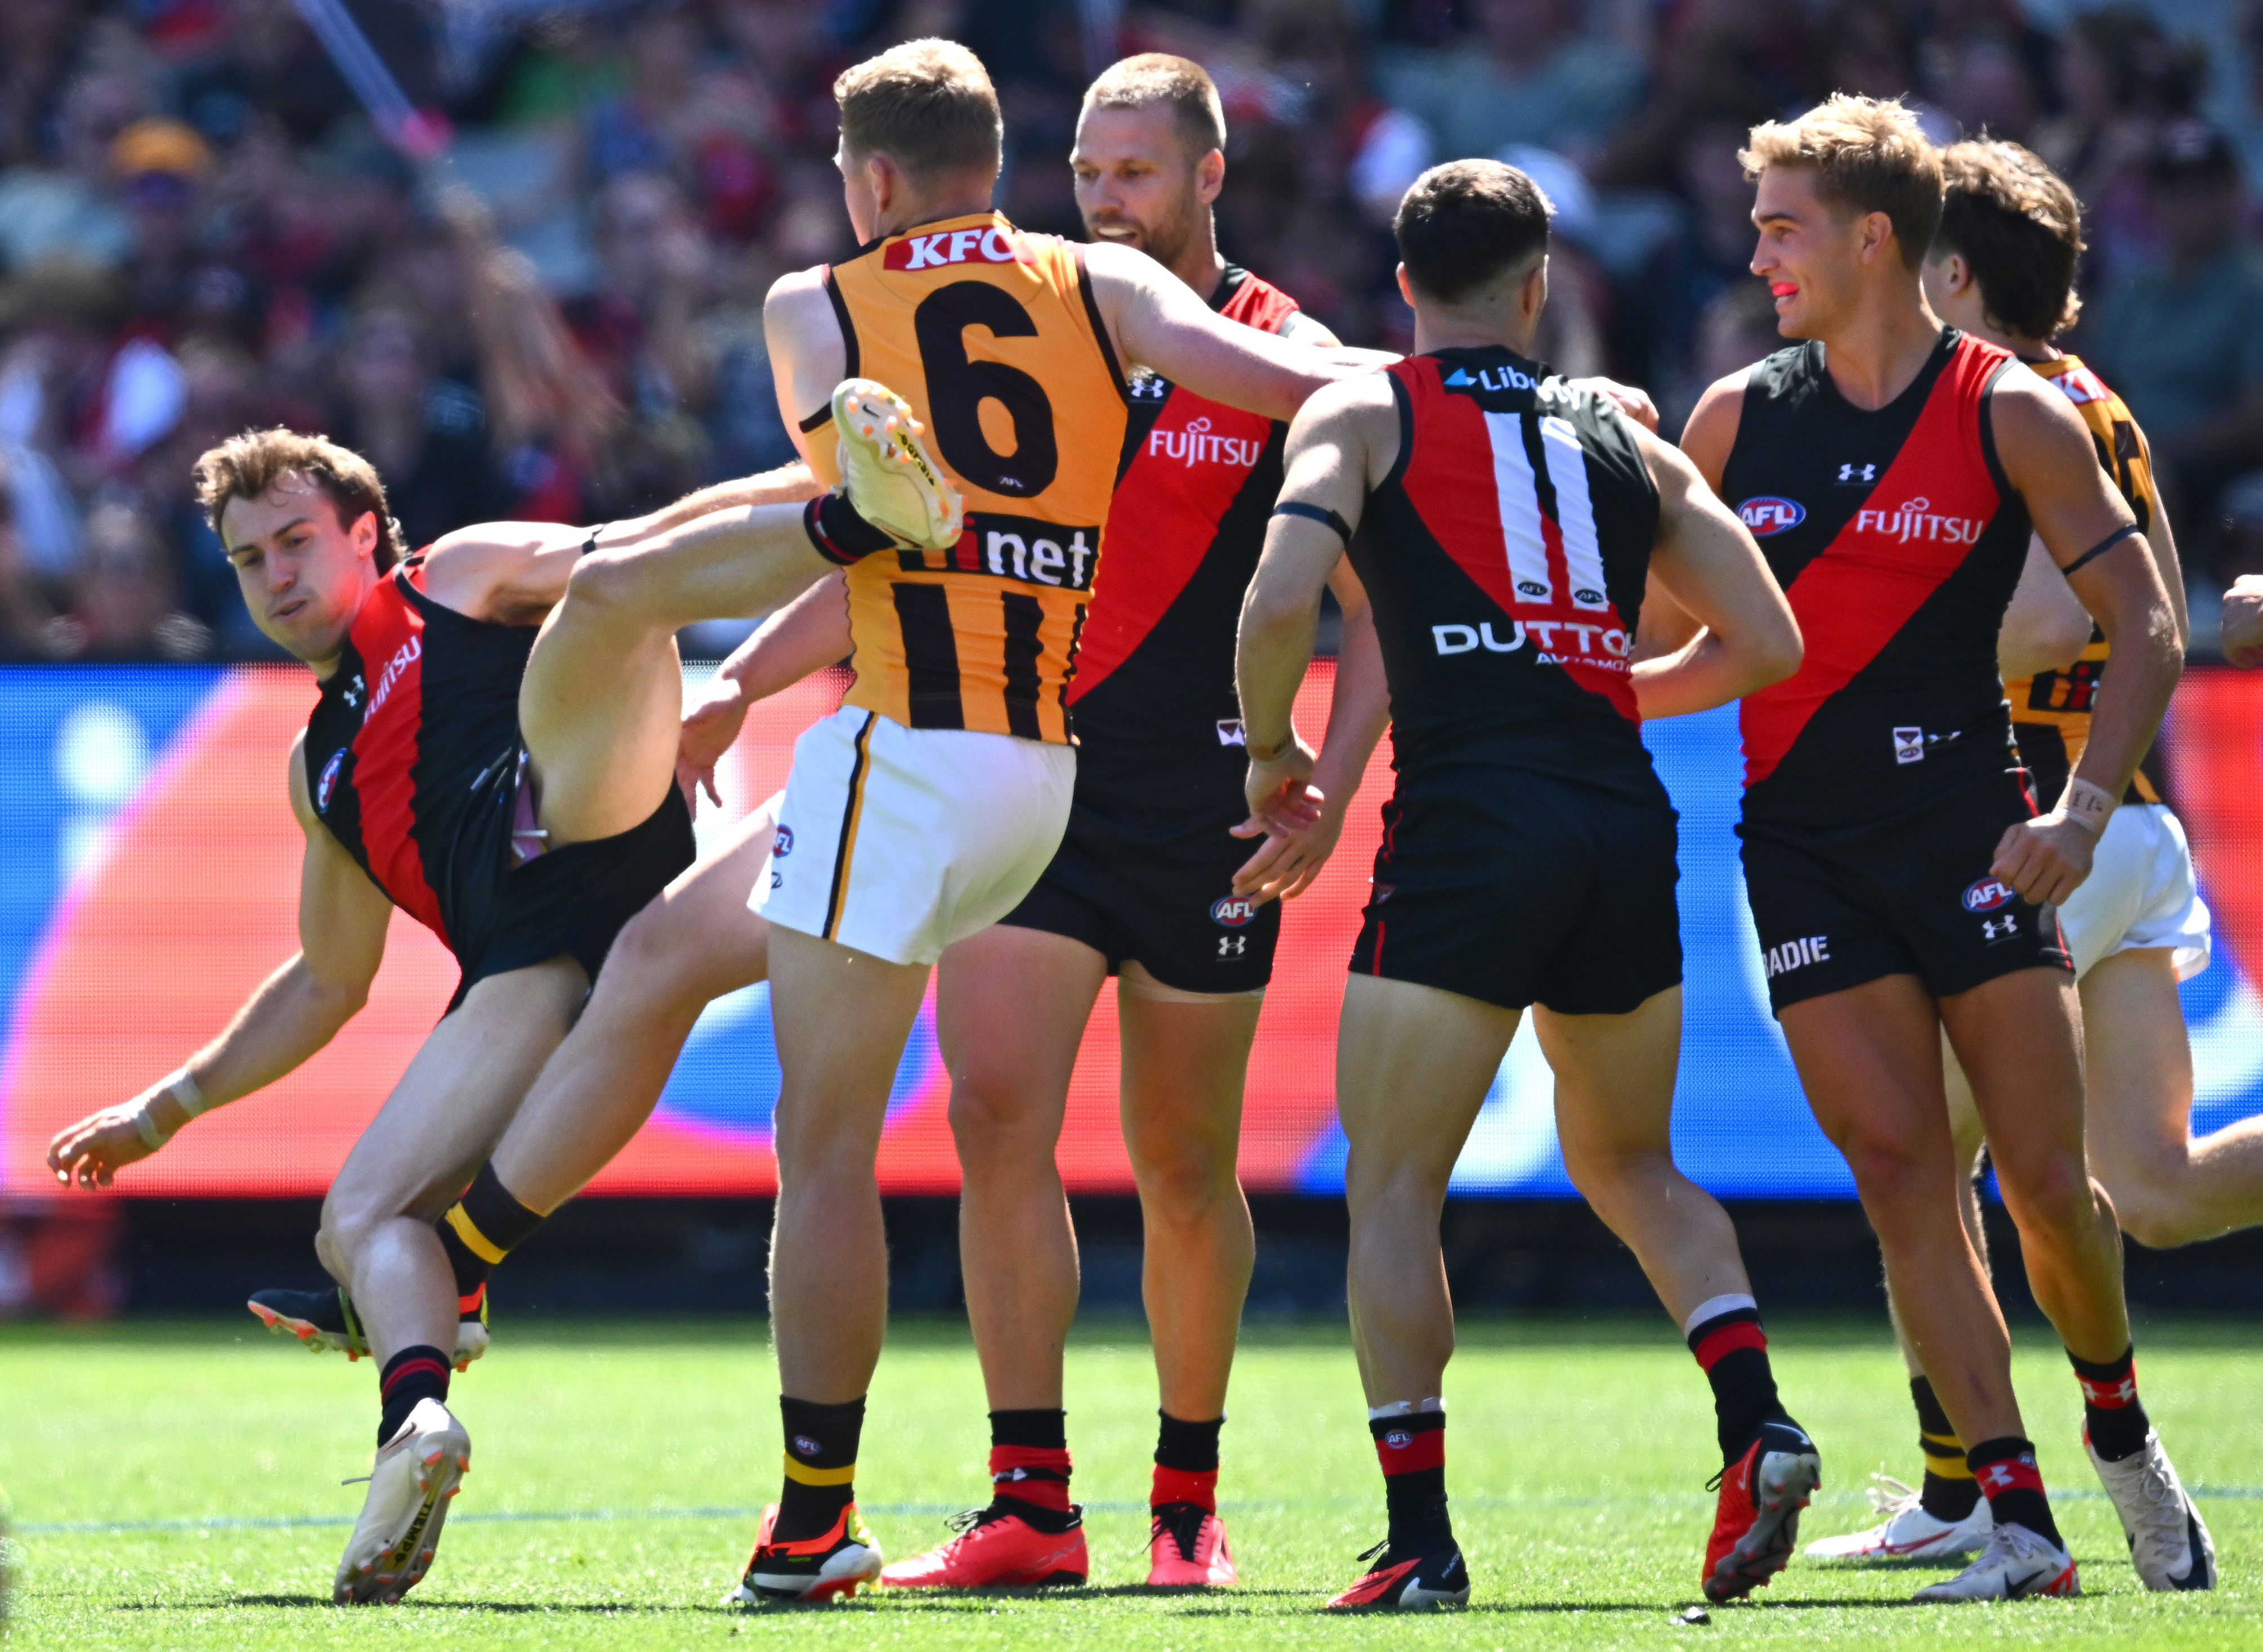 hawthorn skipper learns fate after kicking bomber